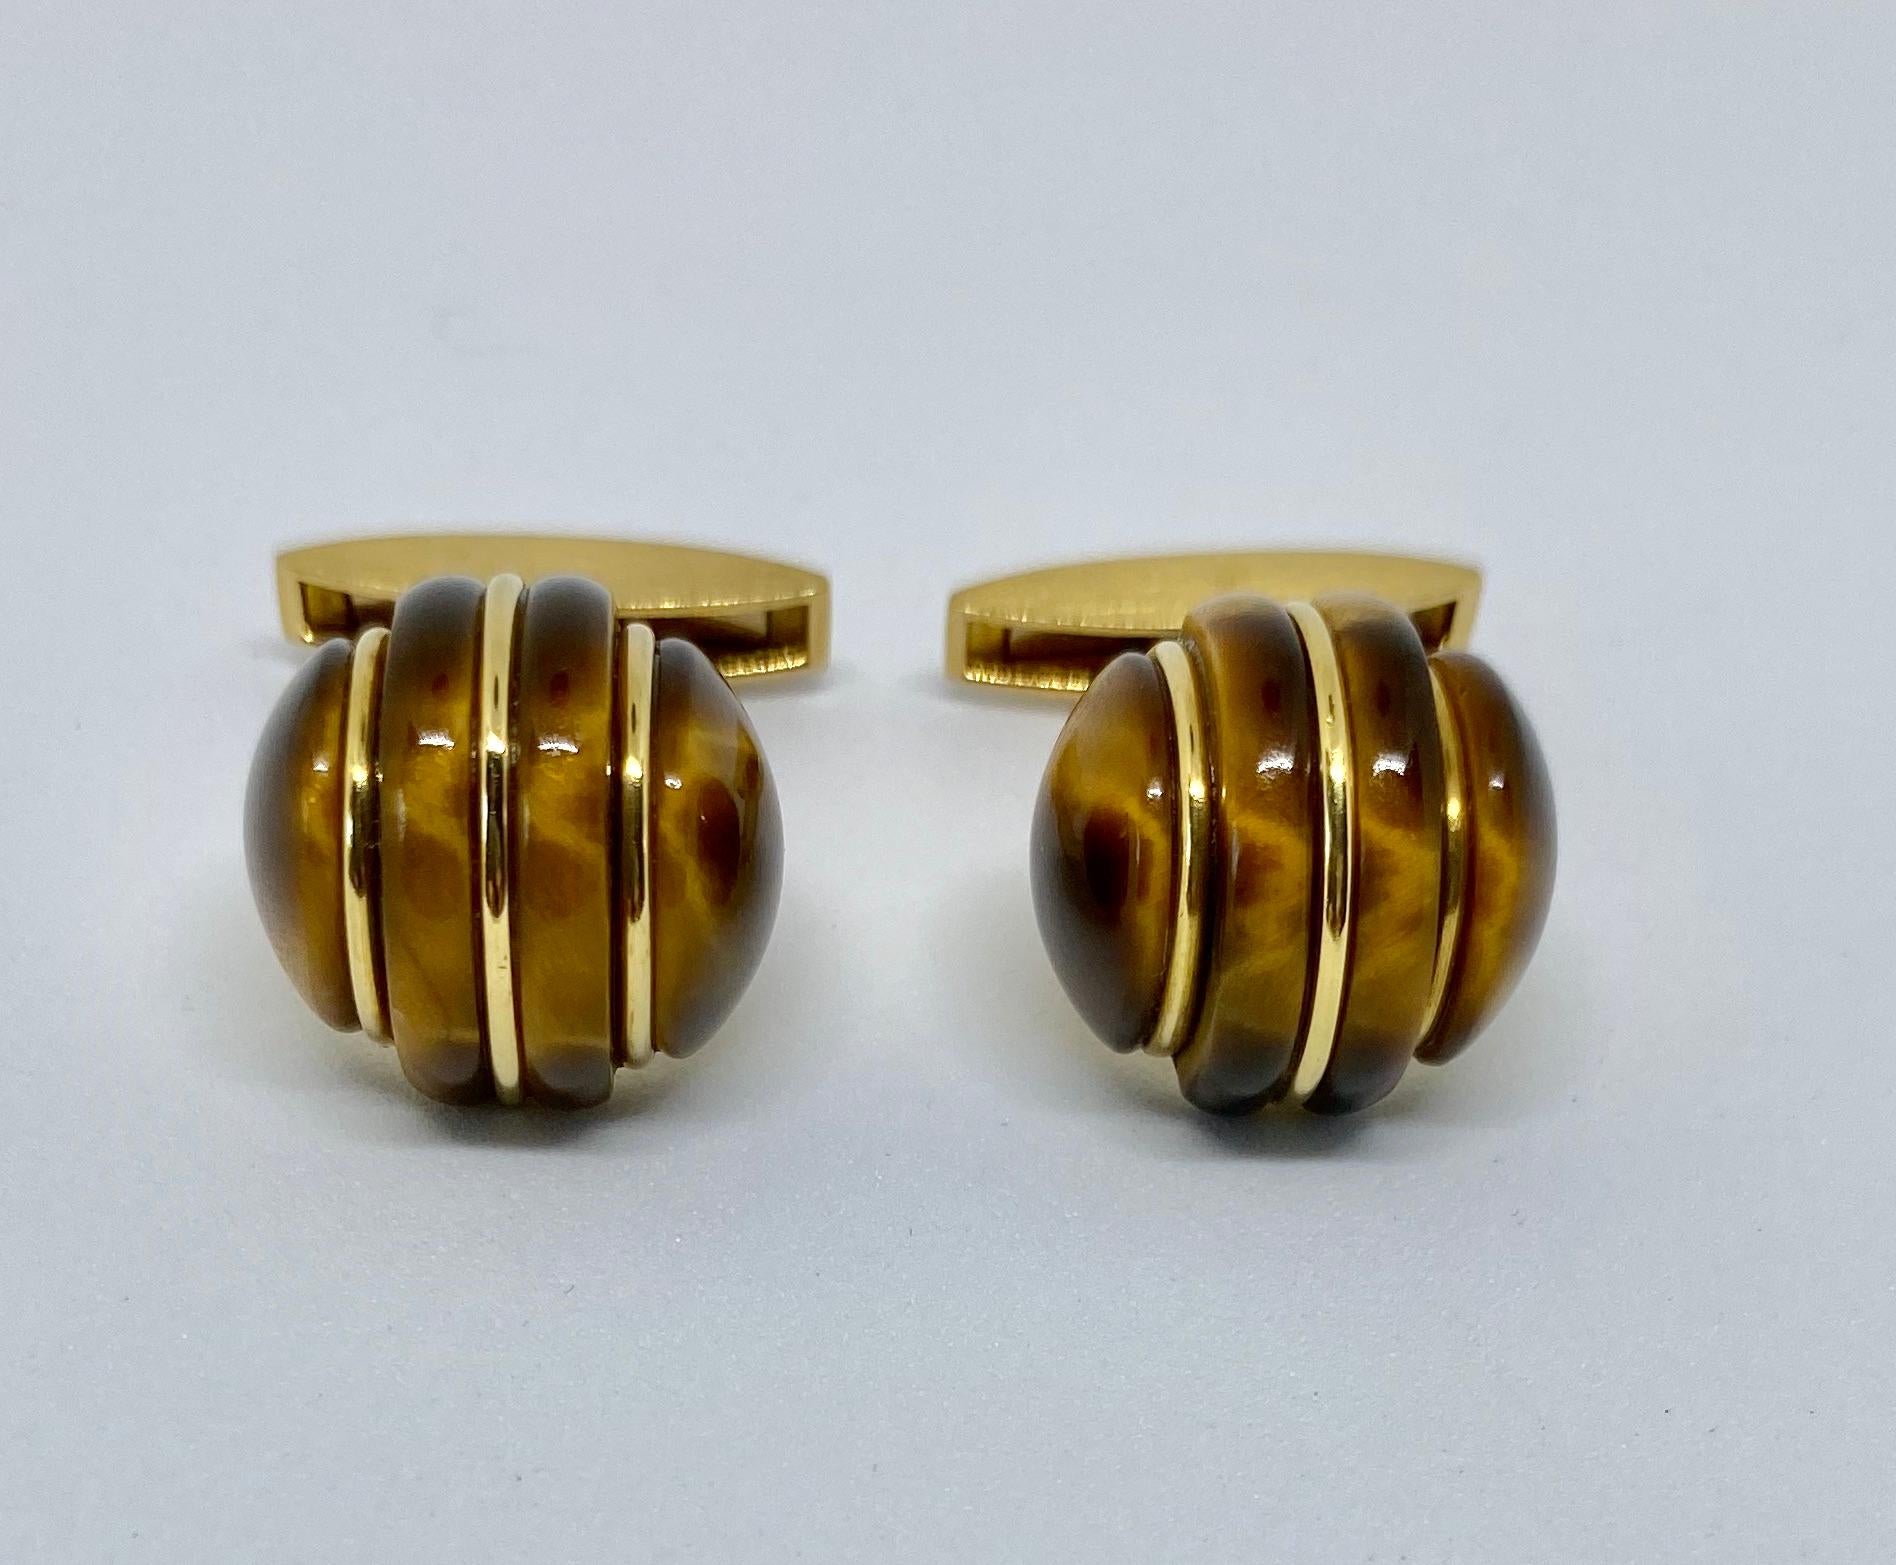 Spectacular, 1970s-era cufflinks made in Germany and featuring two large, carved tiger's eye domes set in 18K yellow gold. The color and quality of the tiger's eye is exceptional, as is the workmanship.

The cufflinks are signed GERMANY and 750